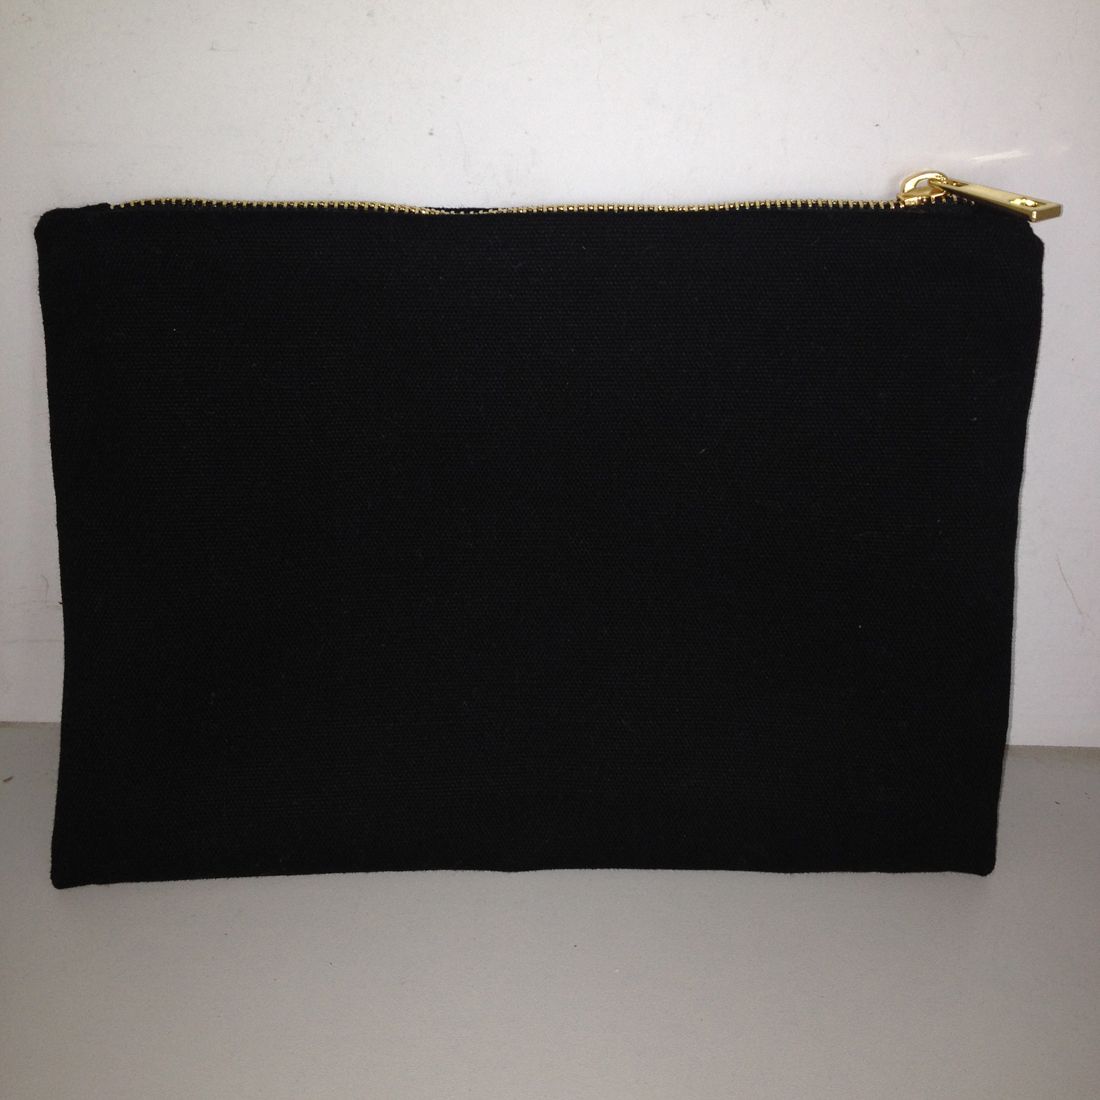 Black Cotton Canvas Makeup Bag with Matching Color Lining 7x10in Gold ...